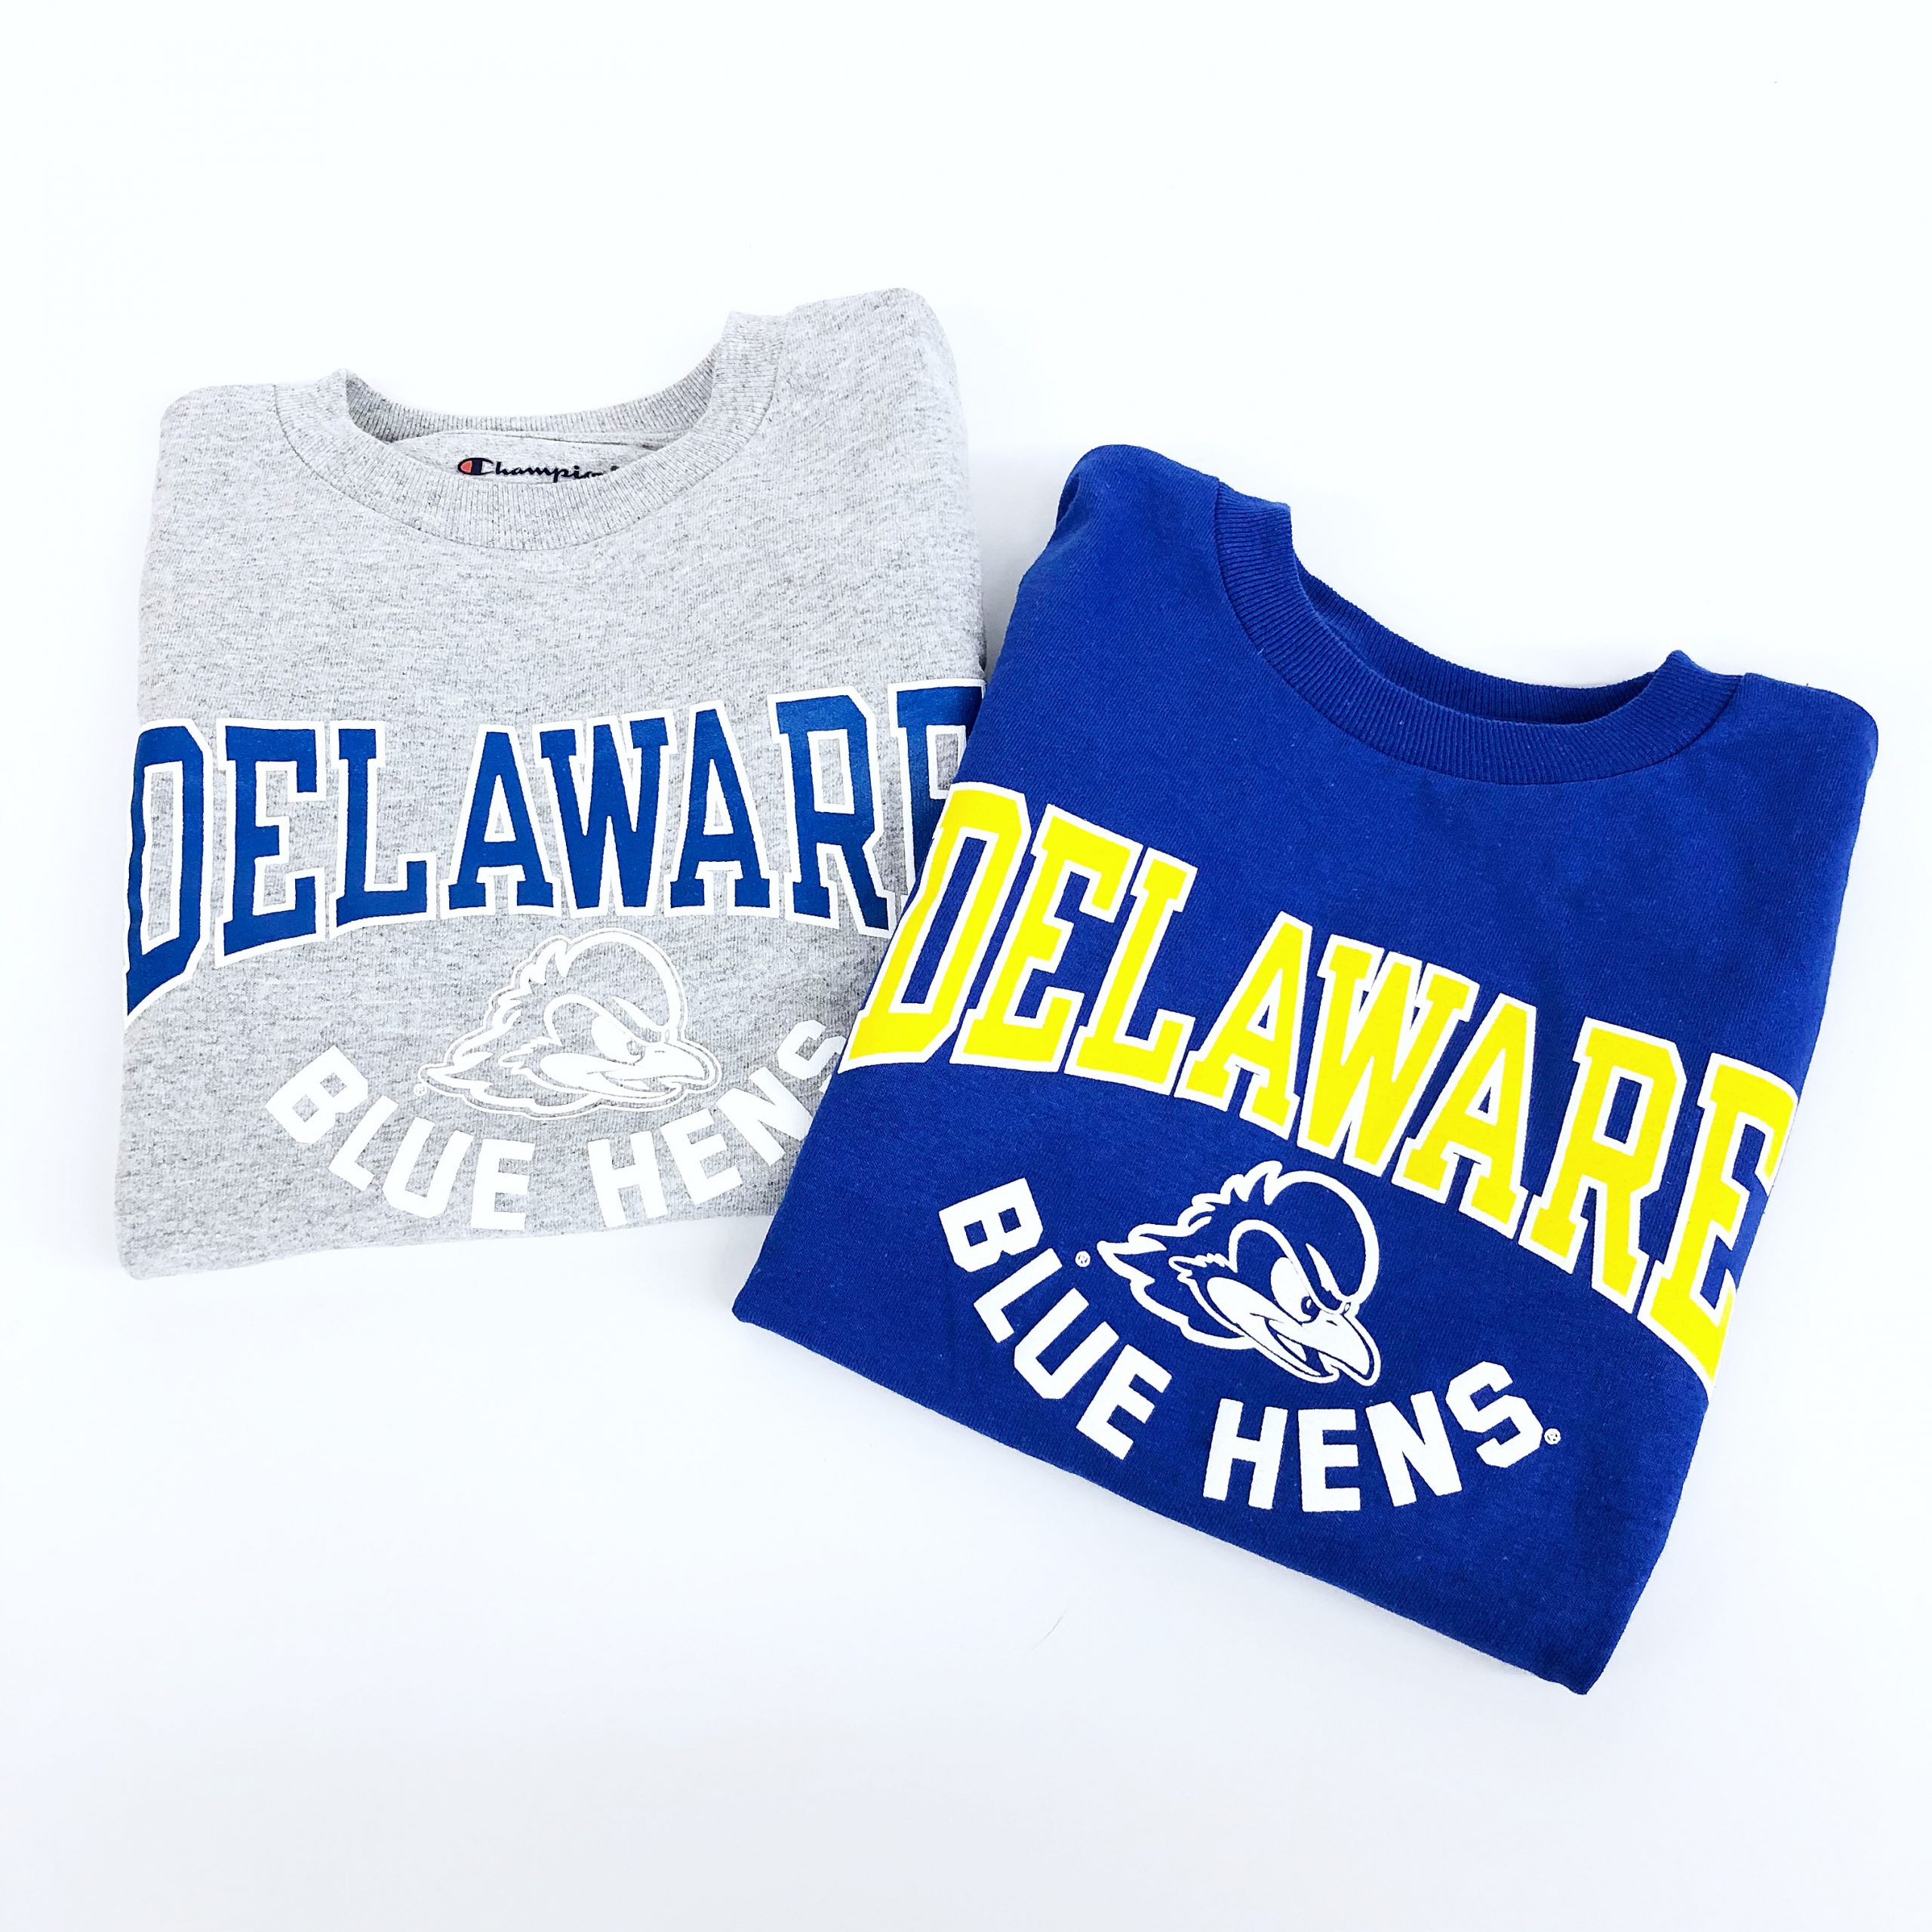 University Delaware Champion Youth T-shirt – National 5 and 10